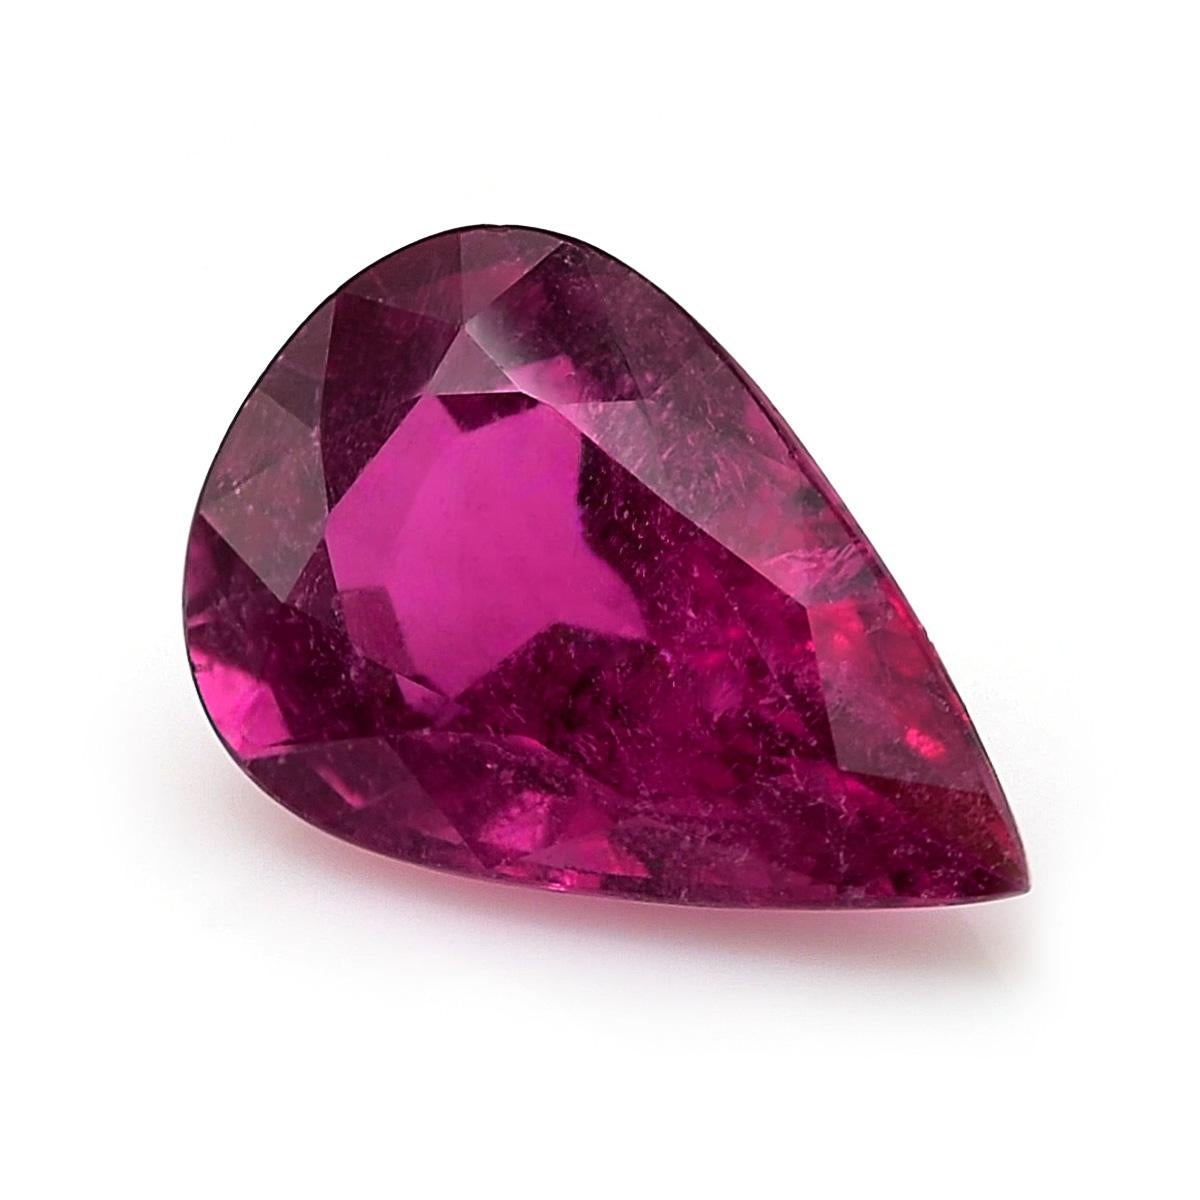 Identification: Natural Rubellite 5.53 carats 

Carat: 5.53 carats
Shape: Pear Shape
Measurements:  14.7 x 9.9 x 6.7 mm 
Cut: Brilliant/Step
Color: Pink 
Clarity: very eye clean

Introducing a magnificent natural Rubellite gemstone weighing 5.53